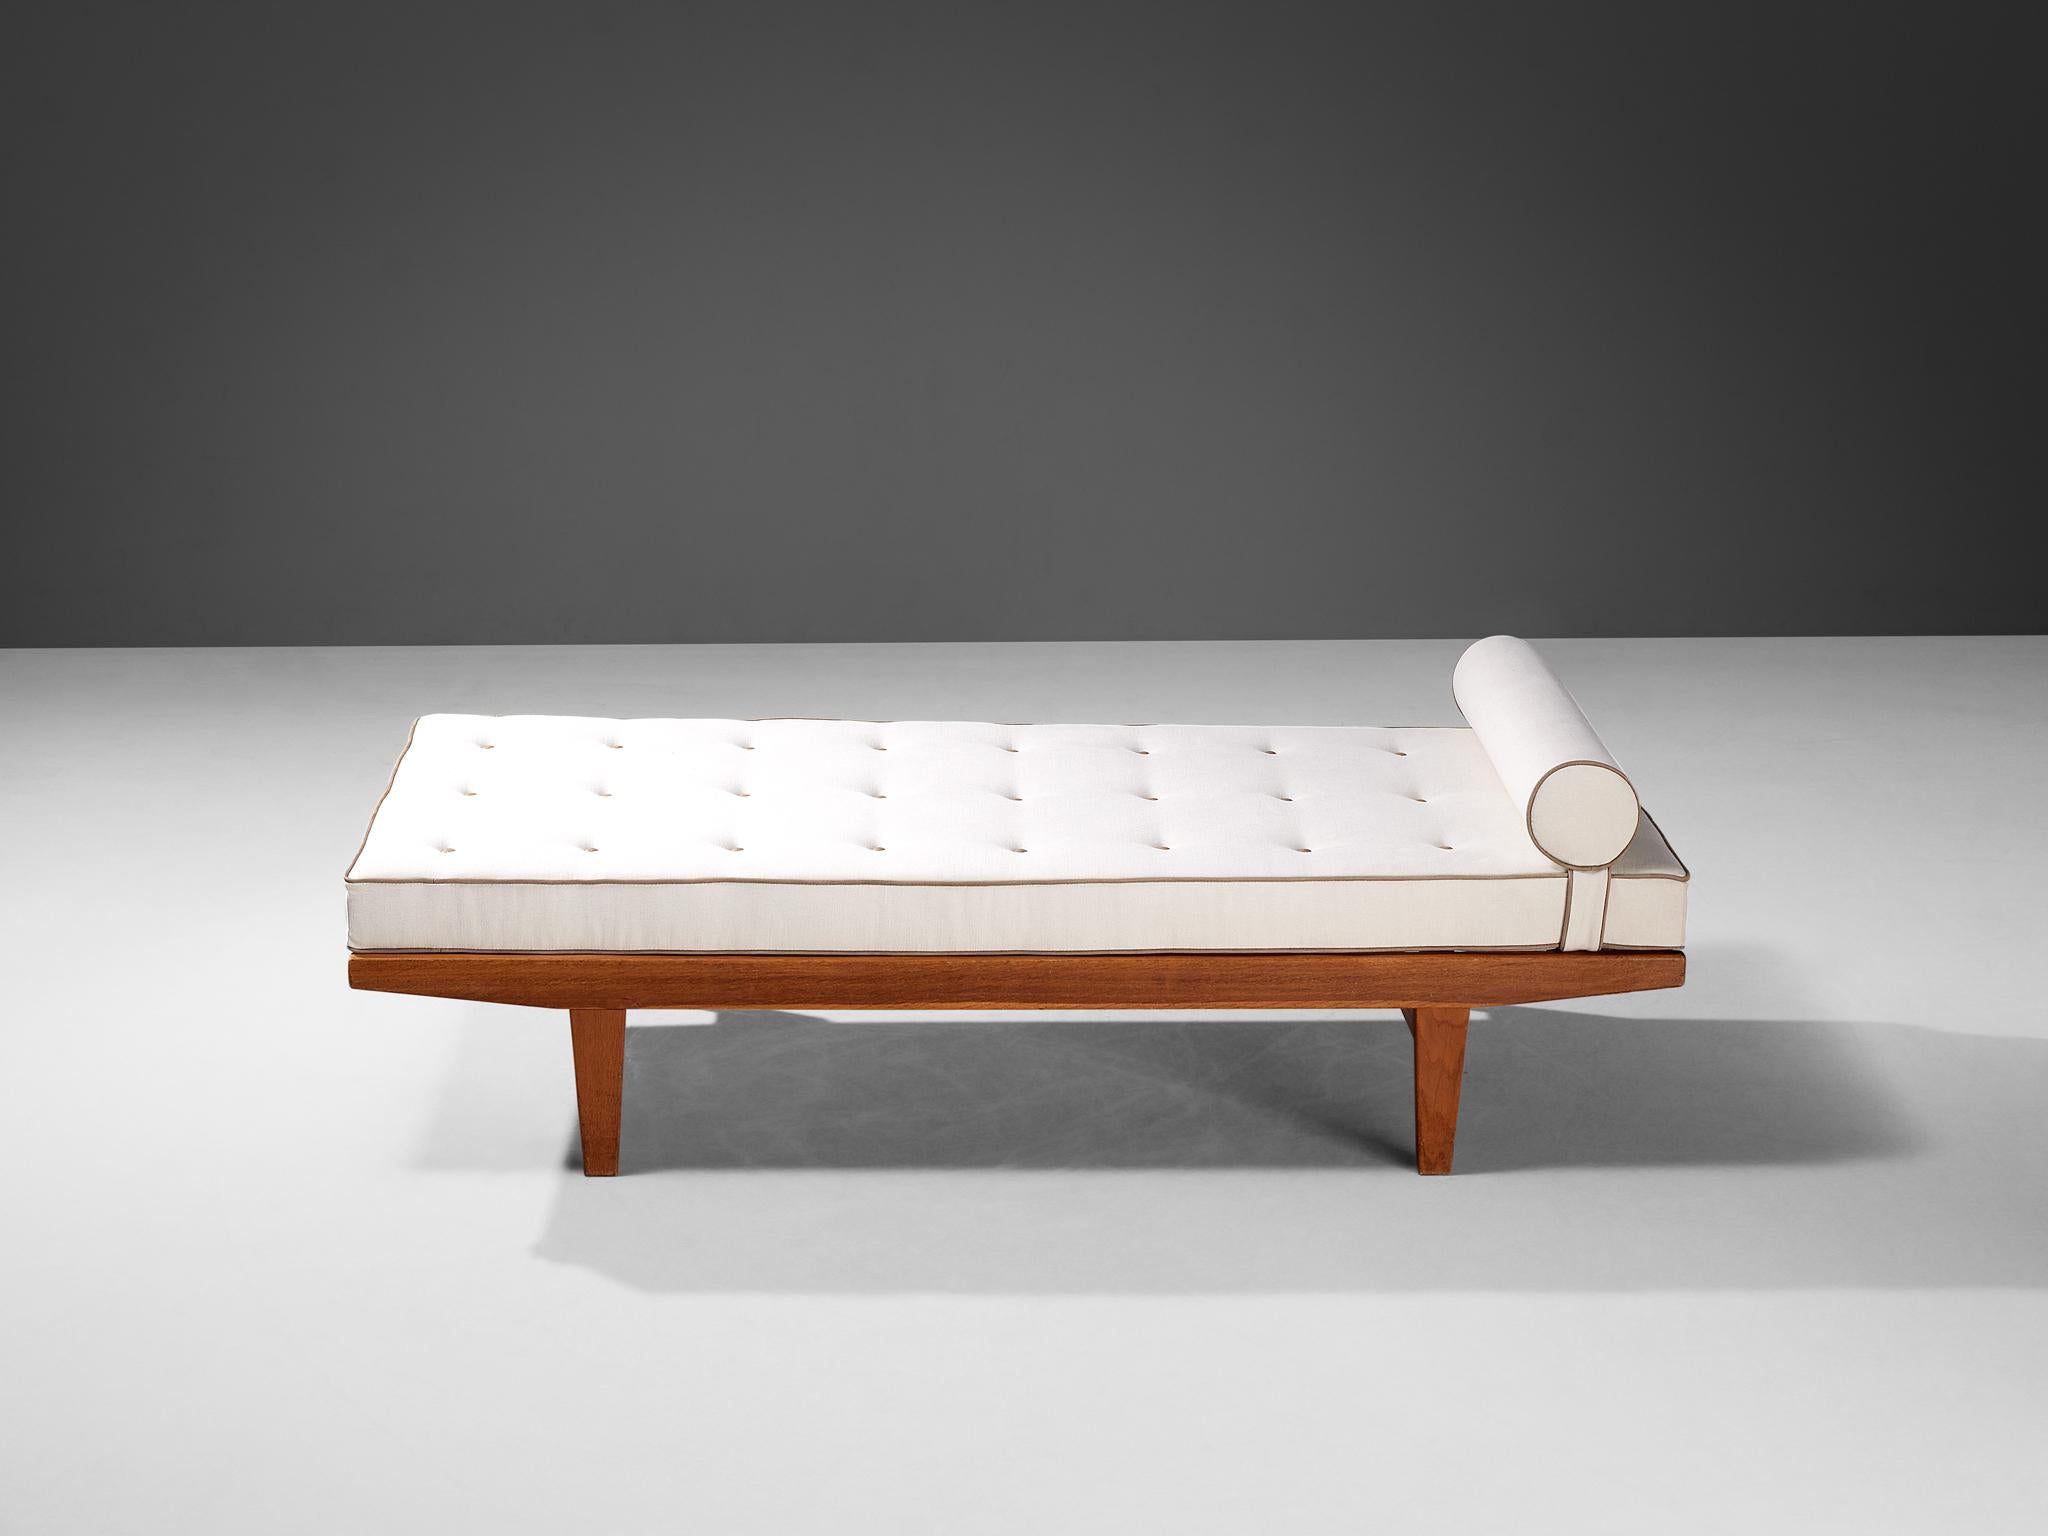 A simple and minimalist bed designed by Danish furniture designer Poul M. Volther (1923-2001). The construction is based on clear lines and angular shapes. Its simple and pure exterior will come forward nicely in a relaxing atmosphere, like a patio